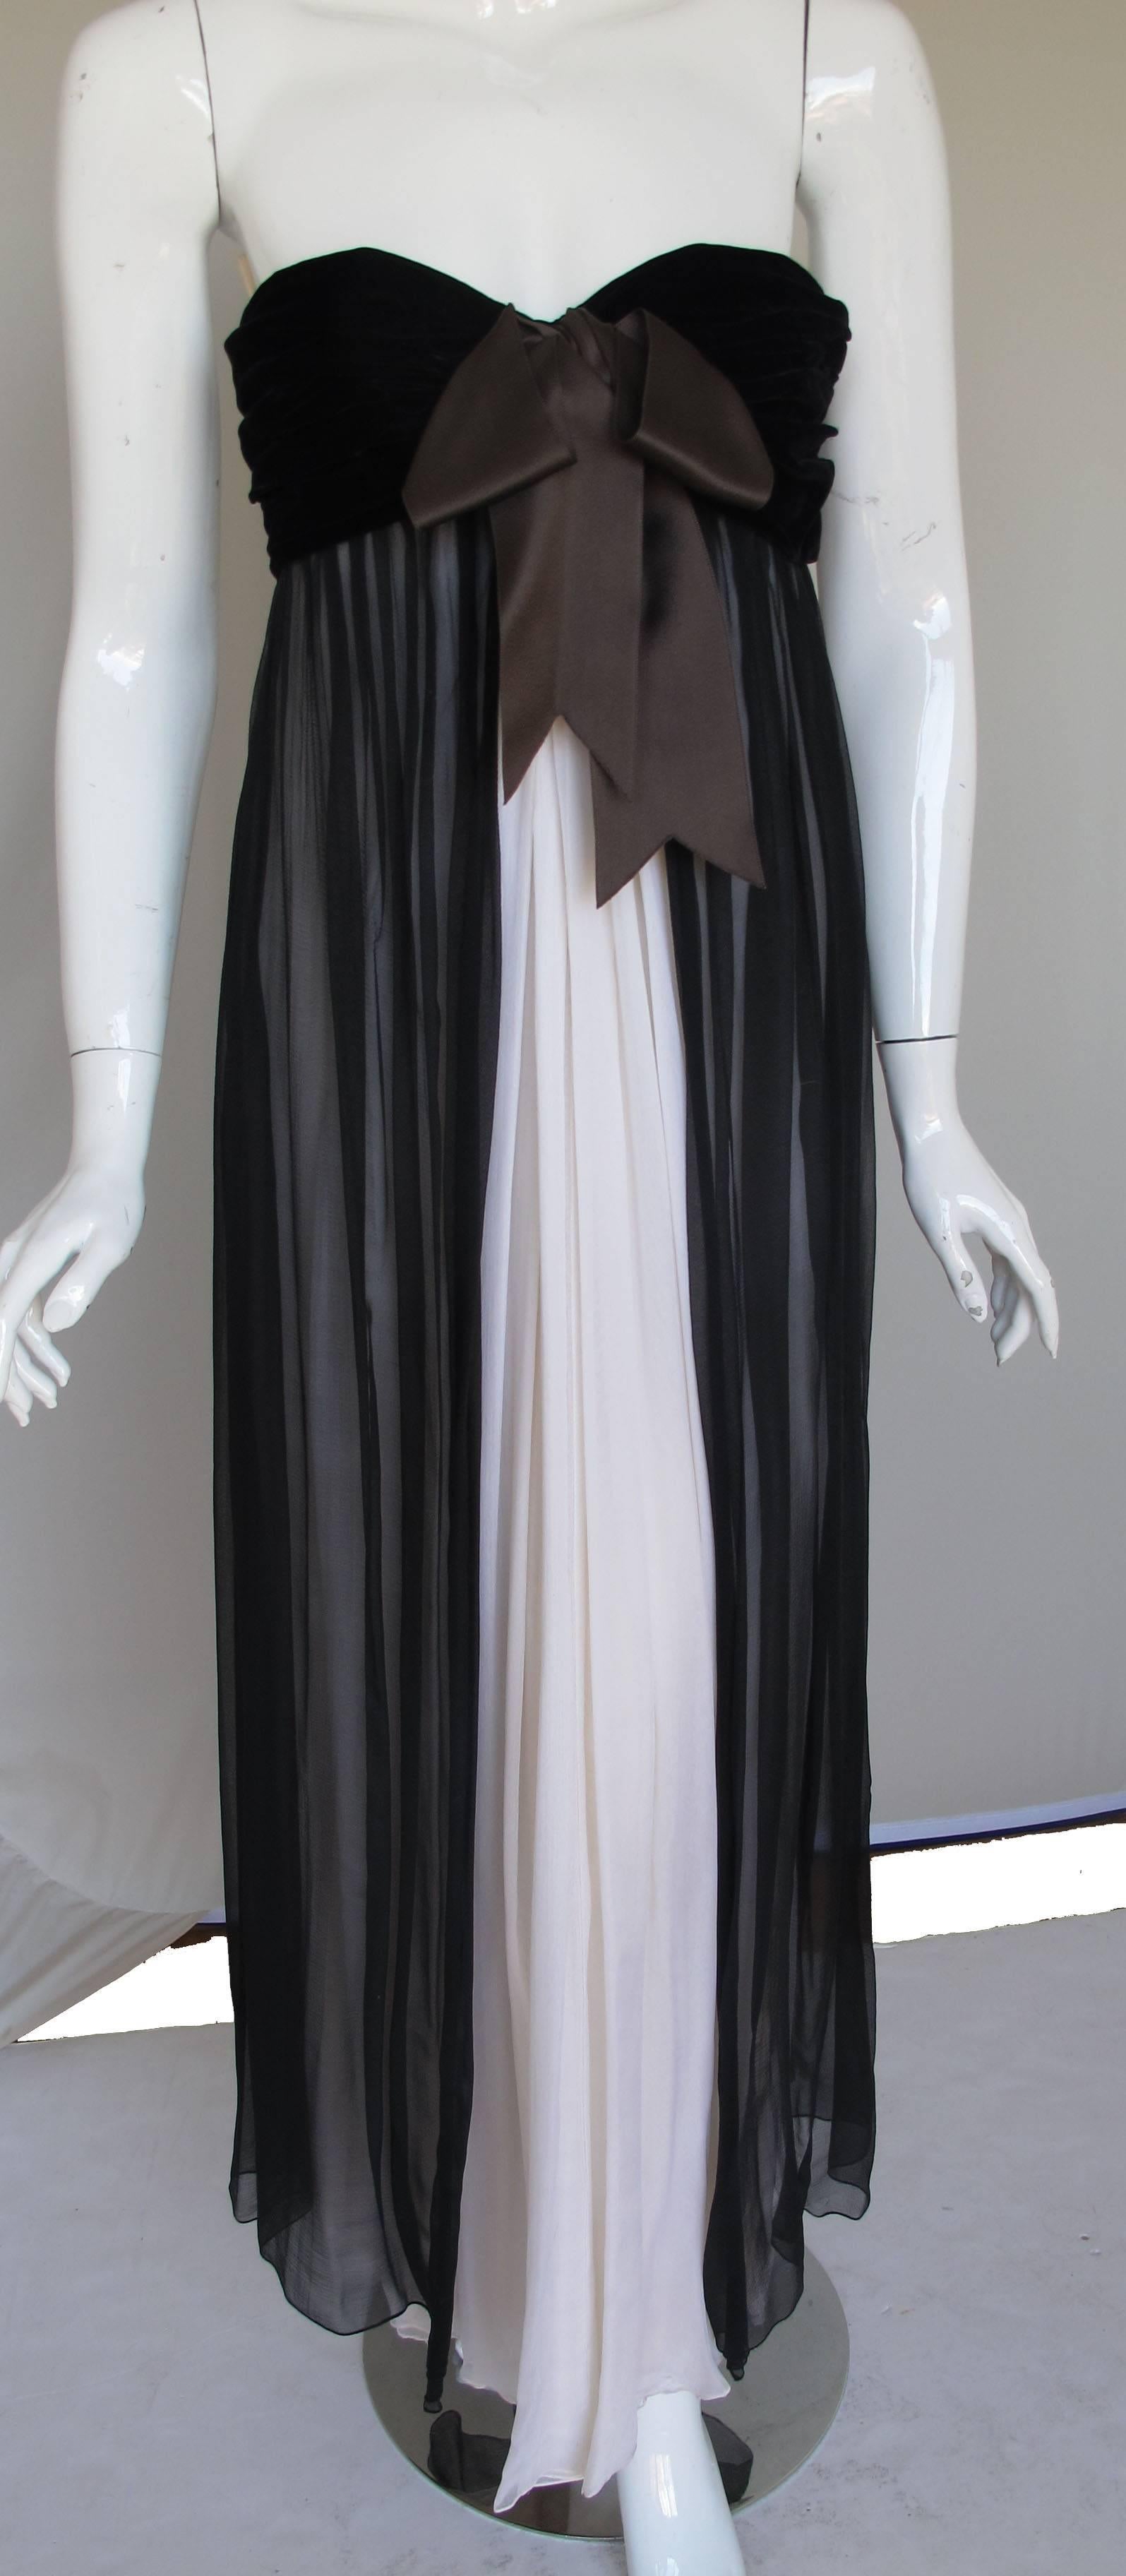 A breathtaking late 1985 Yves Saint Laurent haute couture empire style evening gown featuring a ruched black velvet top with an oversized brown silk bow and a skirt comprised of a single layer of black chiffon on top of a double layer of